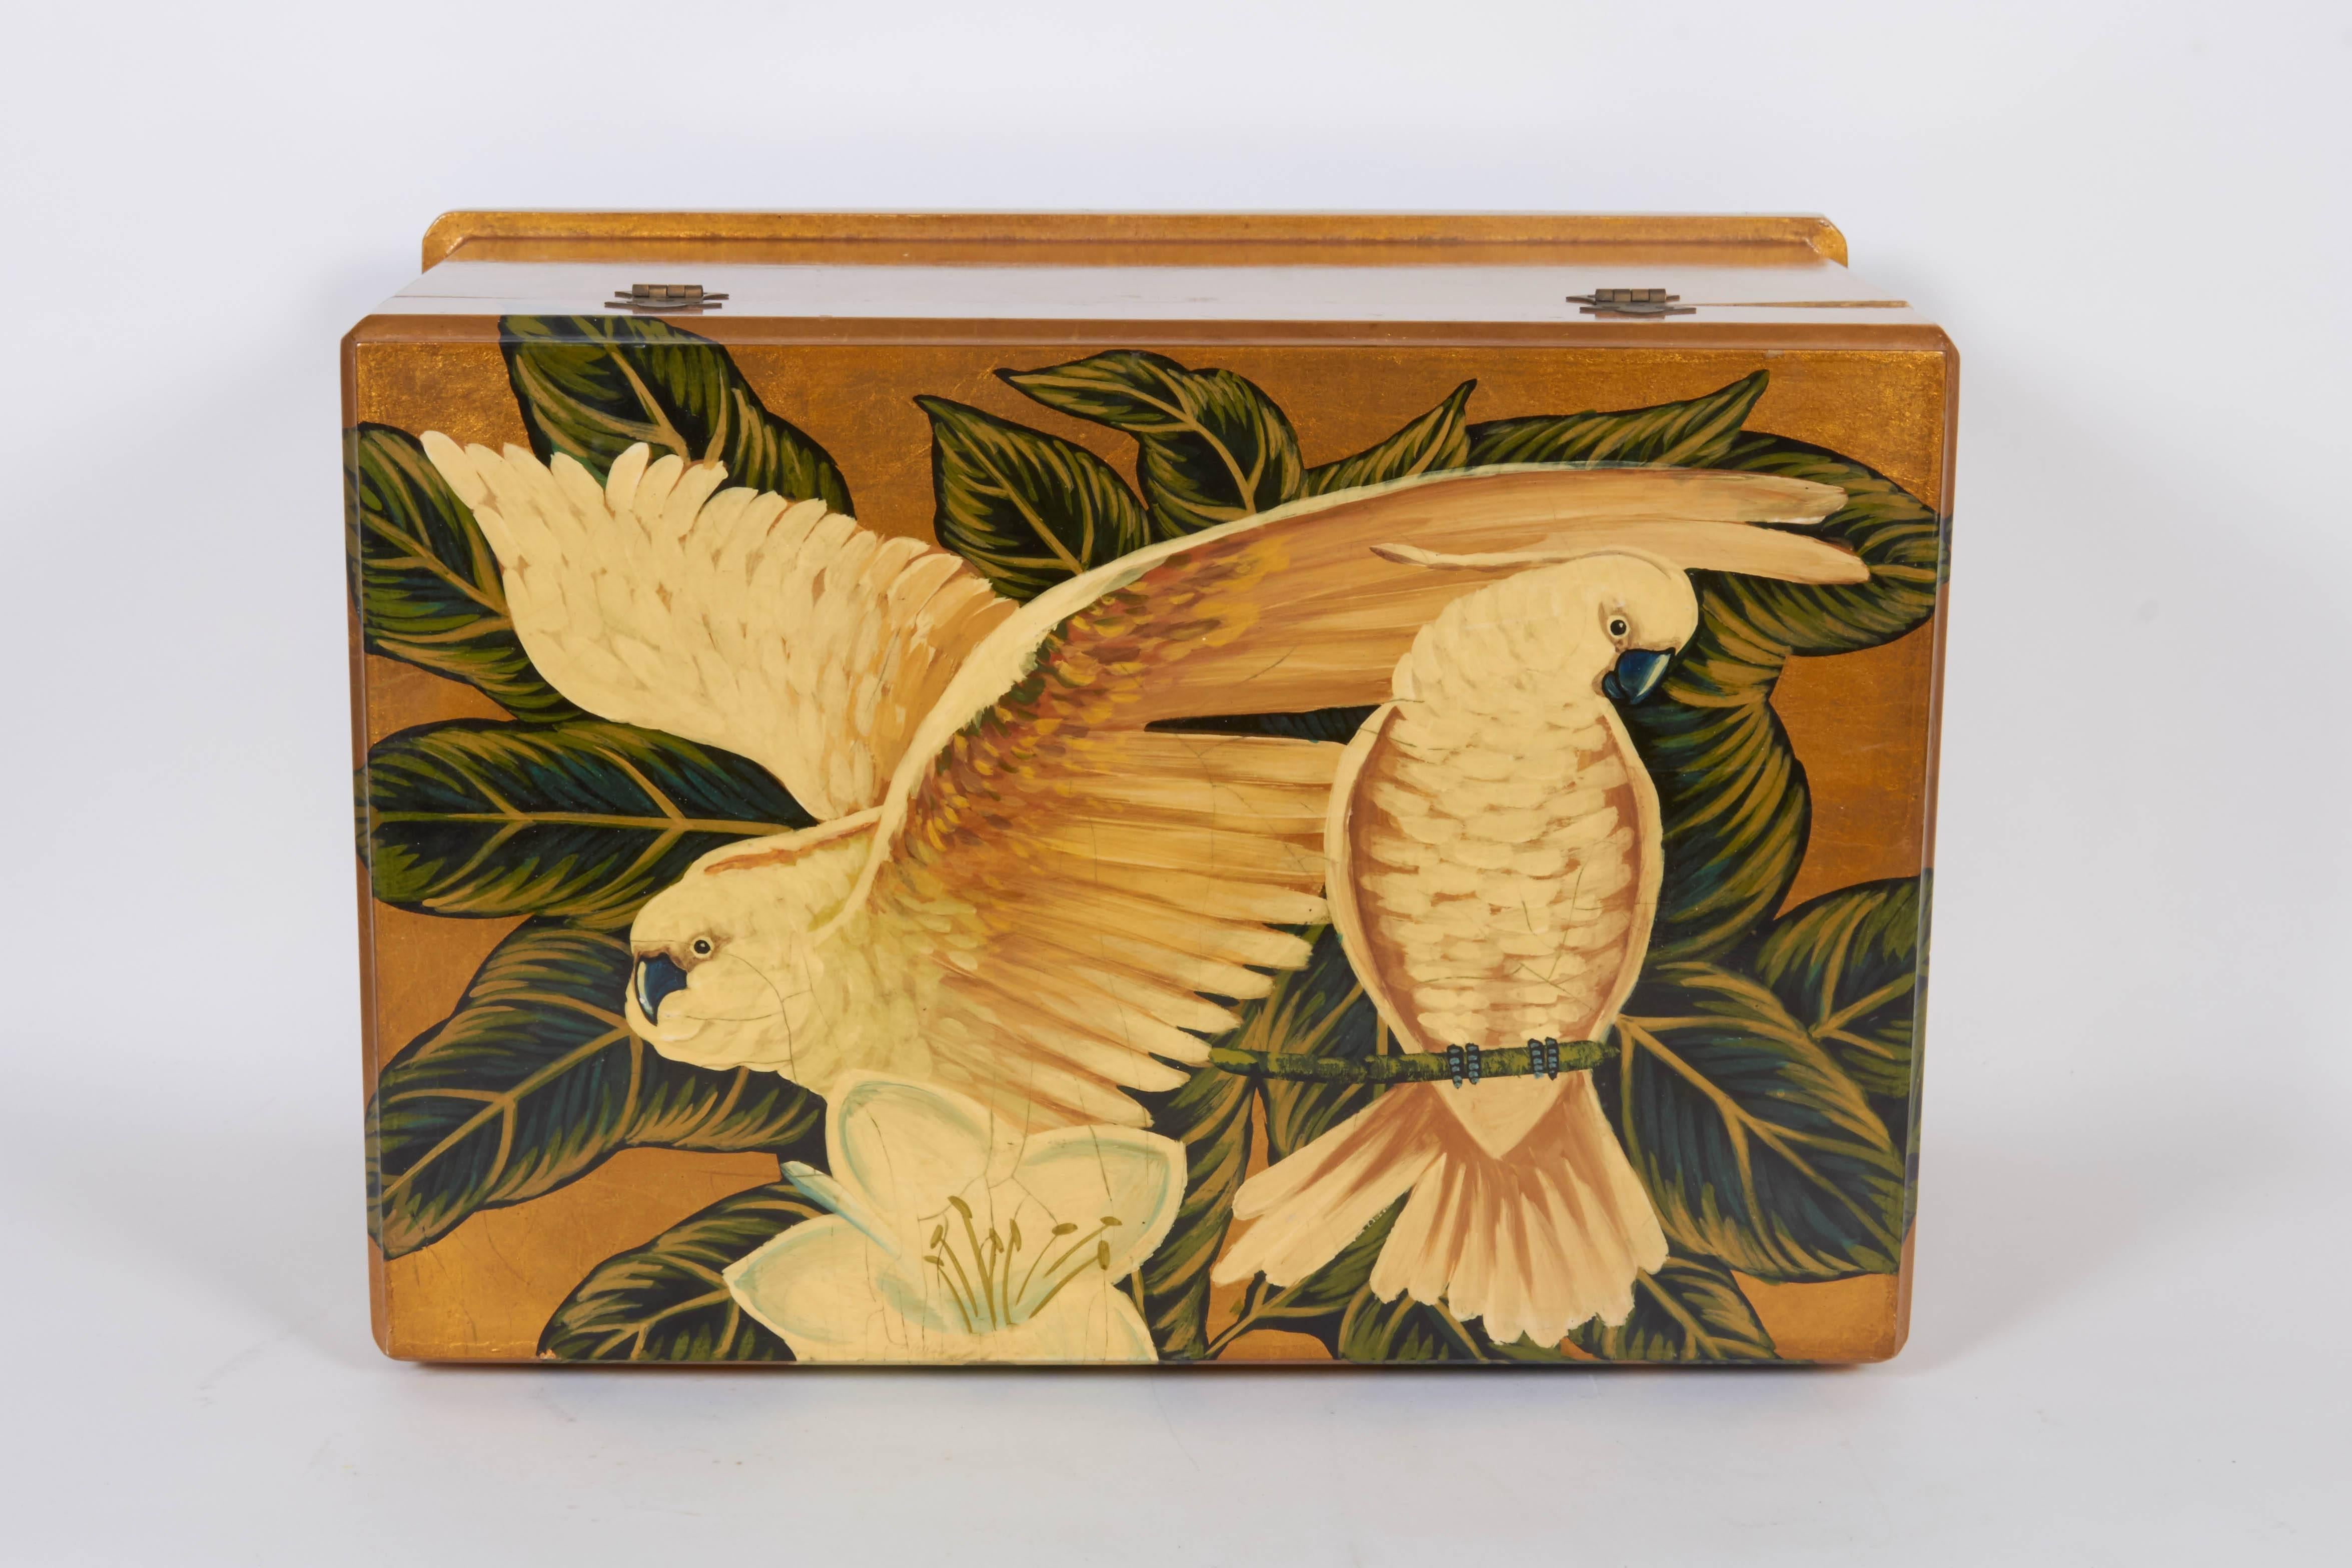 Hand-Painted Gold Leaf Jewelry Box with Cockatoos 4